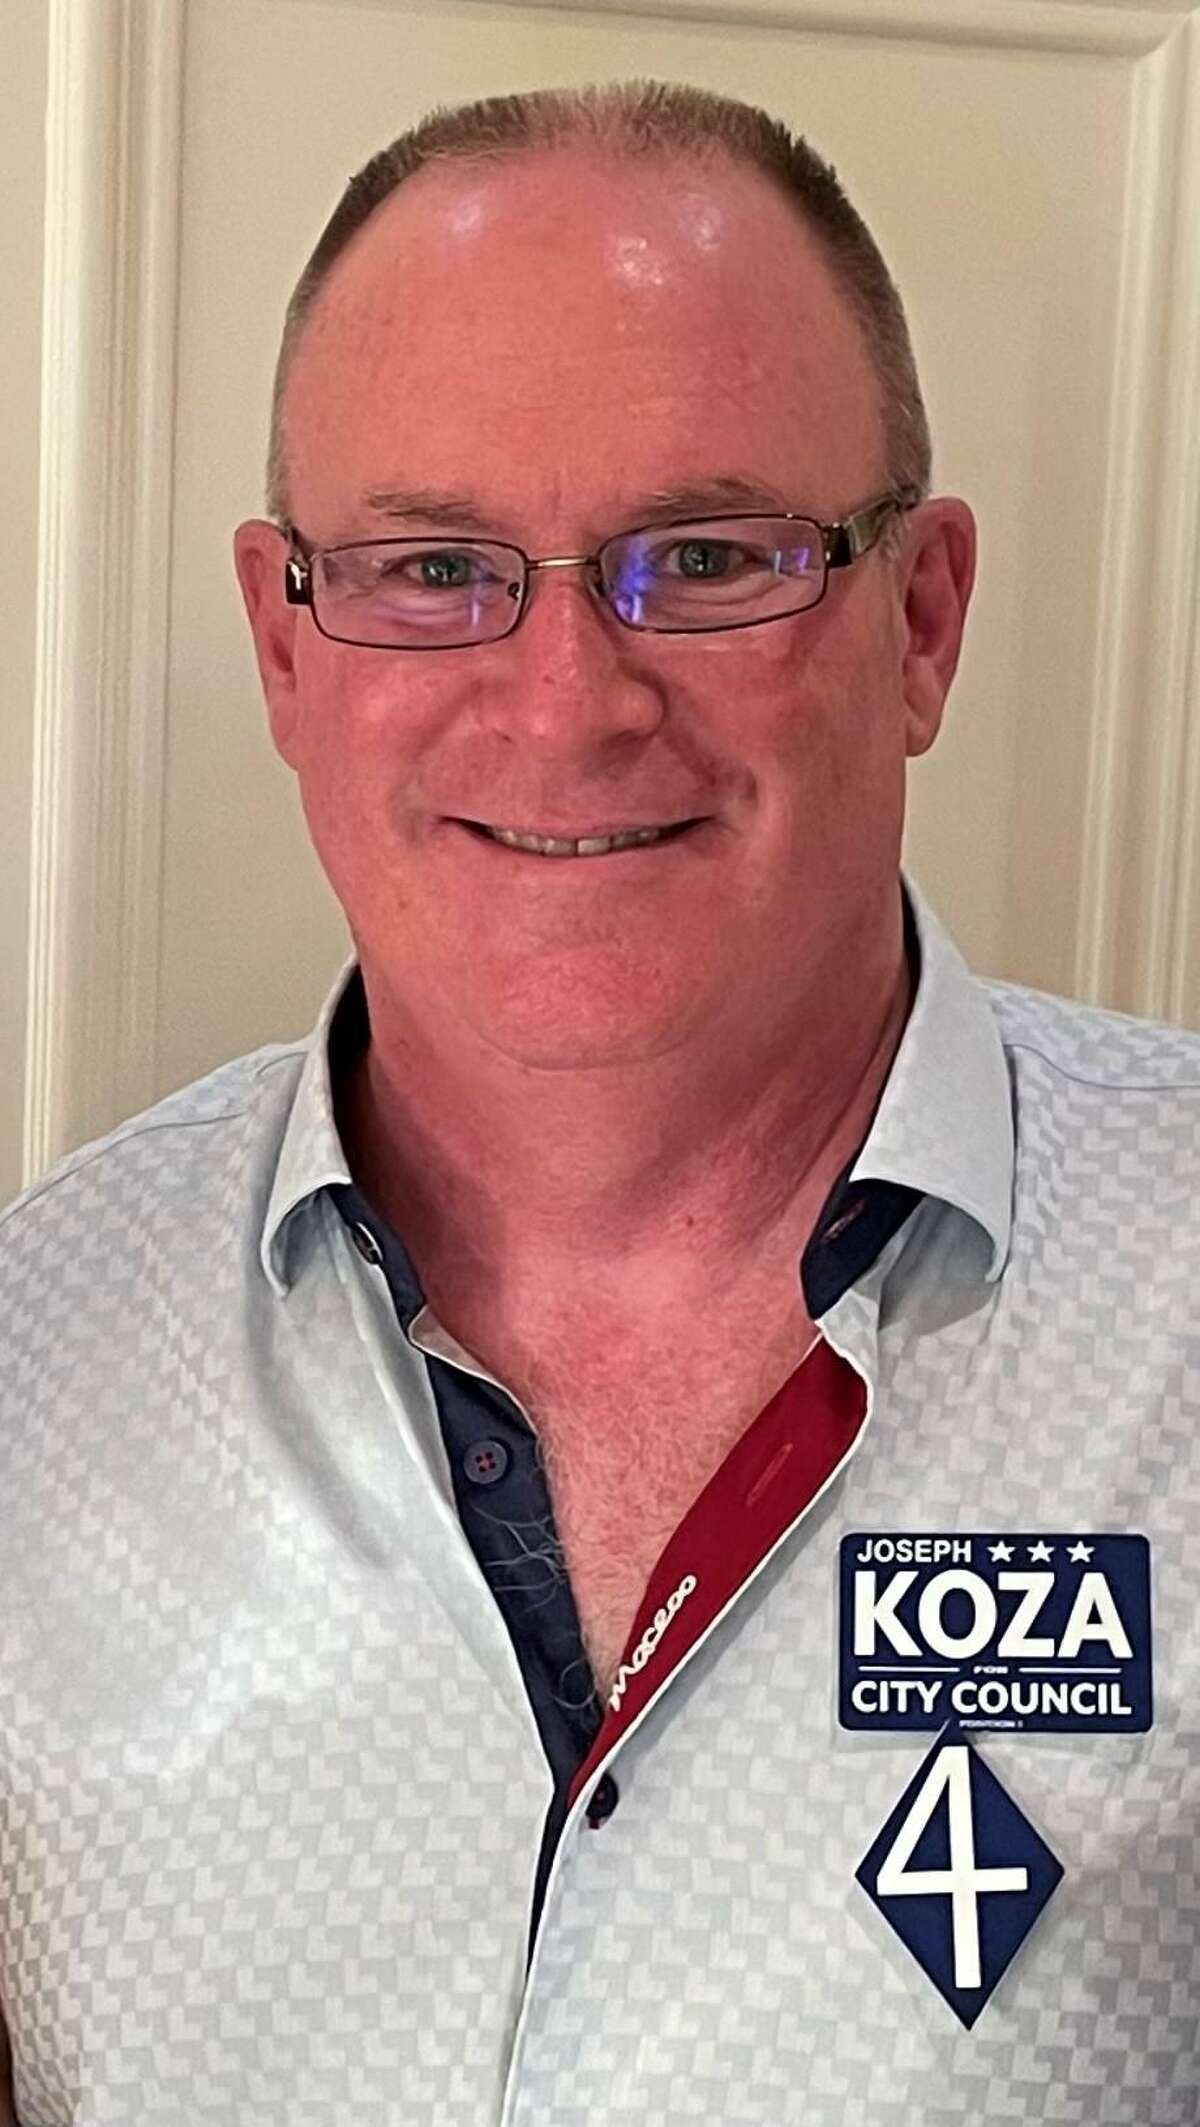 Joseph Koza, who is self-employed, is running for Pearland City Council Position 1 against incumbent Luke Orlando.